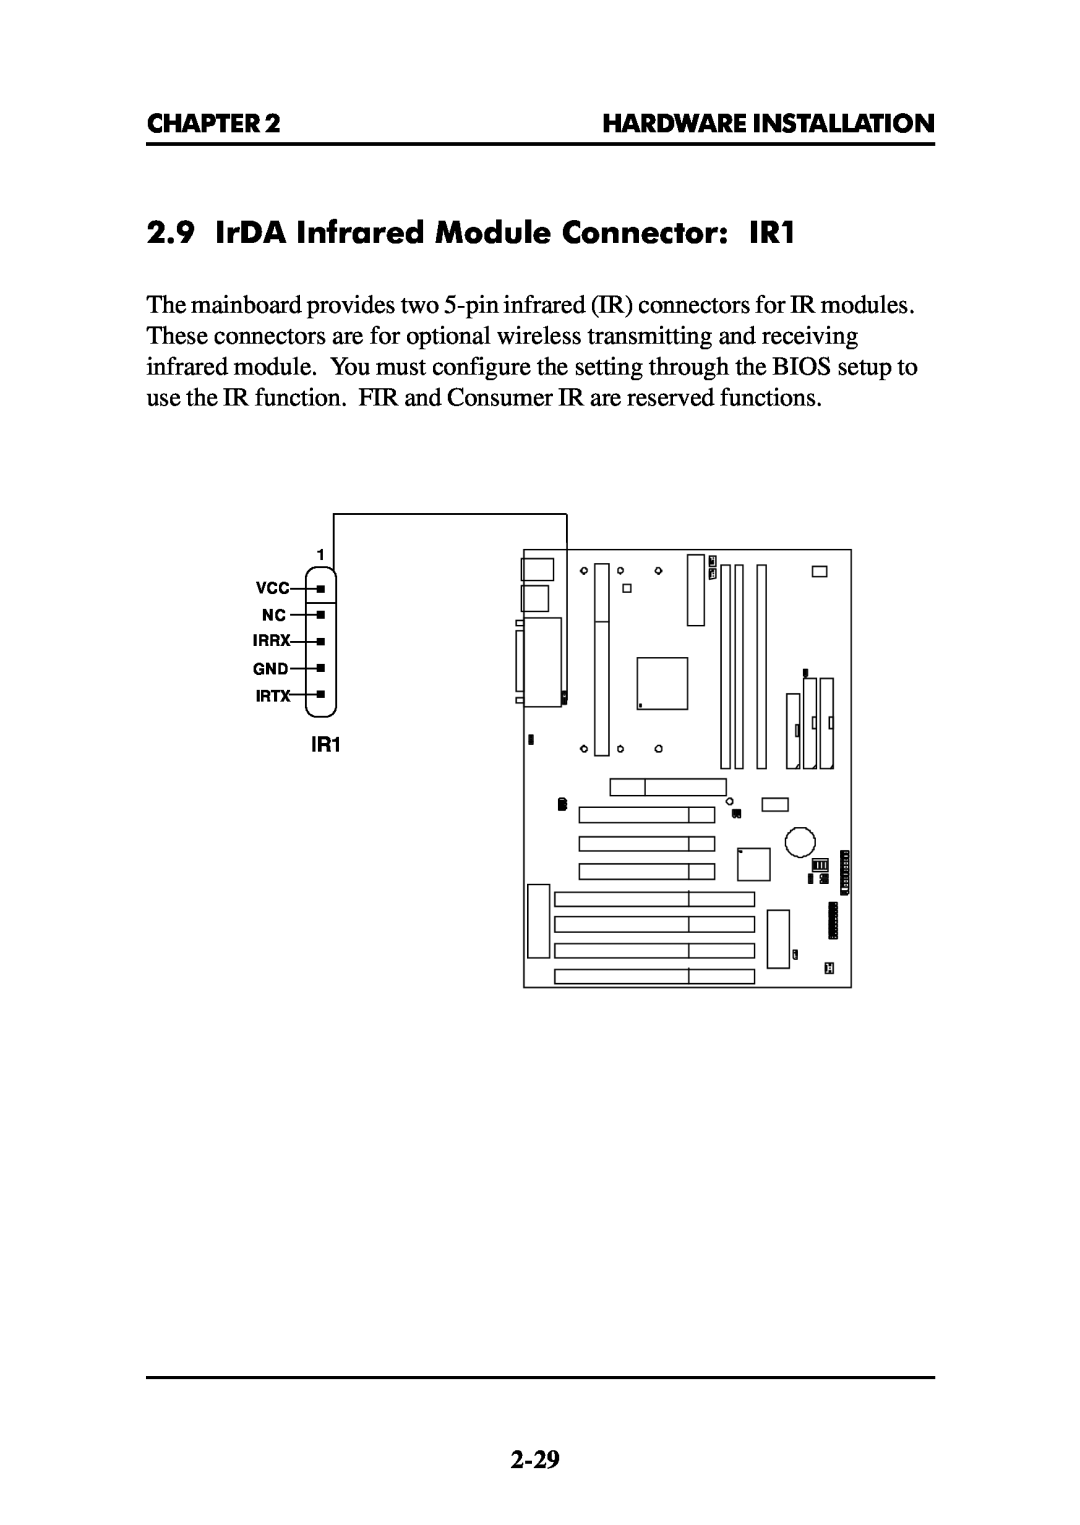 Intel MS-6112 manual IrDA Infrared Module Connector IR1, Chapter, Hardware Installation, Vcc Nc Irrx Gnd Irtx 